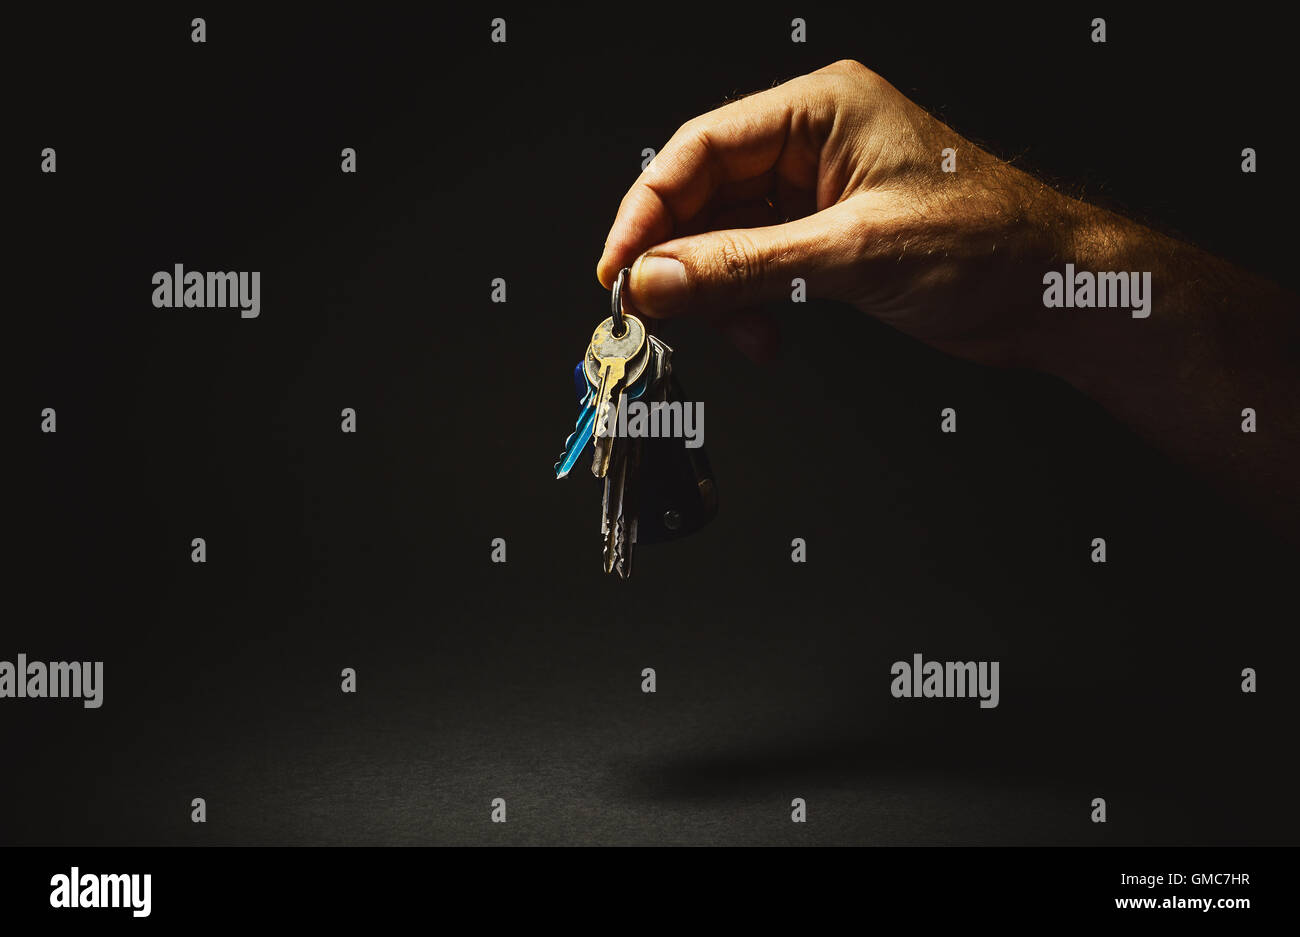 Conceptual composition about having a solution, good life or similar. Man's hand holding a keys. Stock Photo